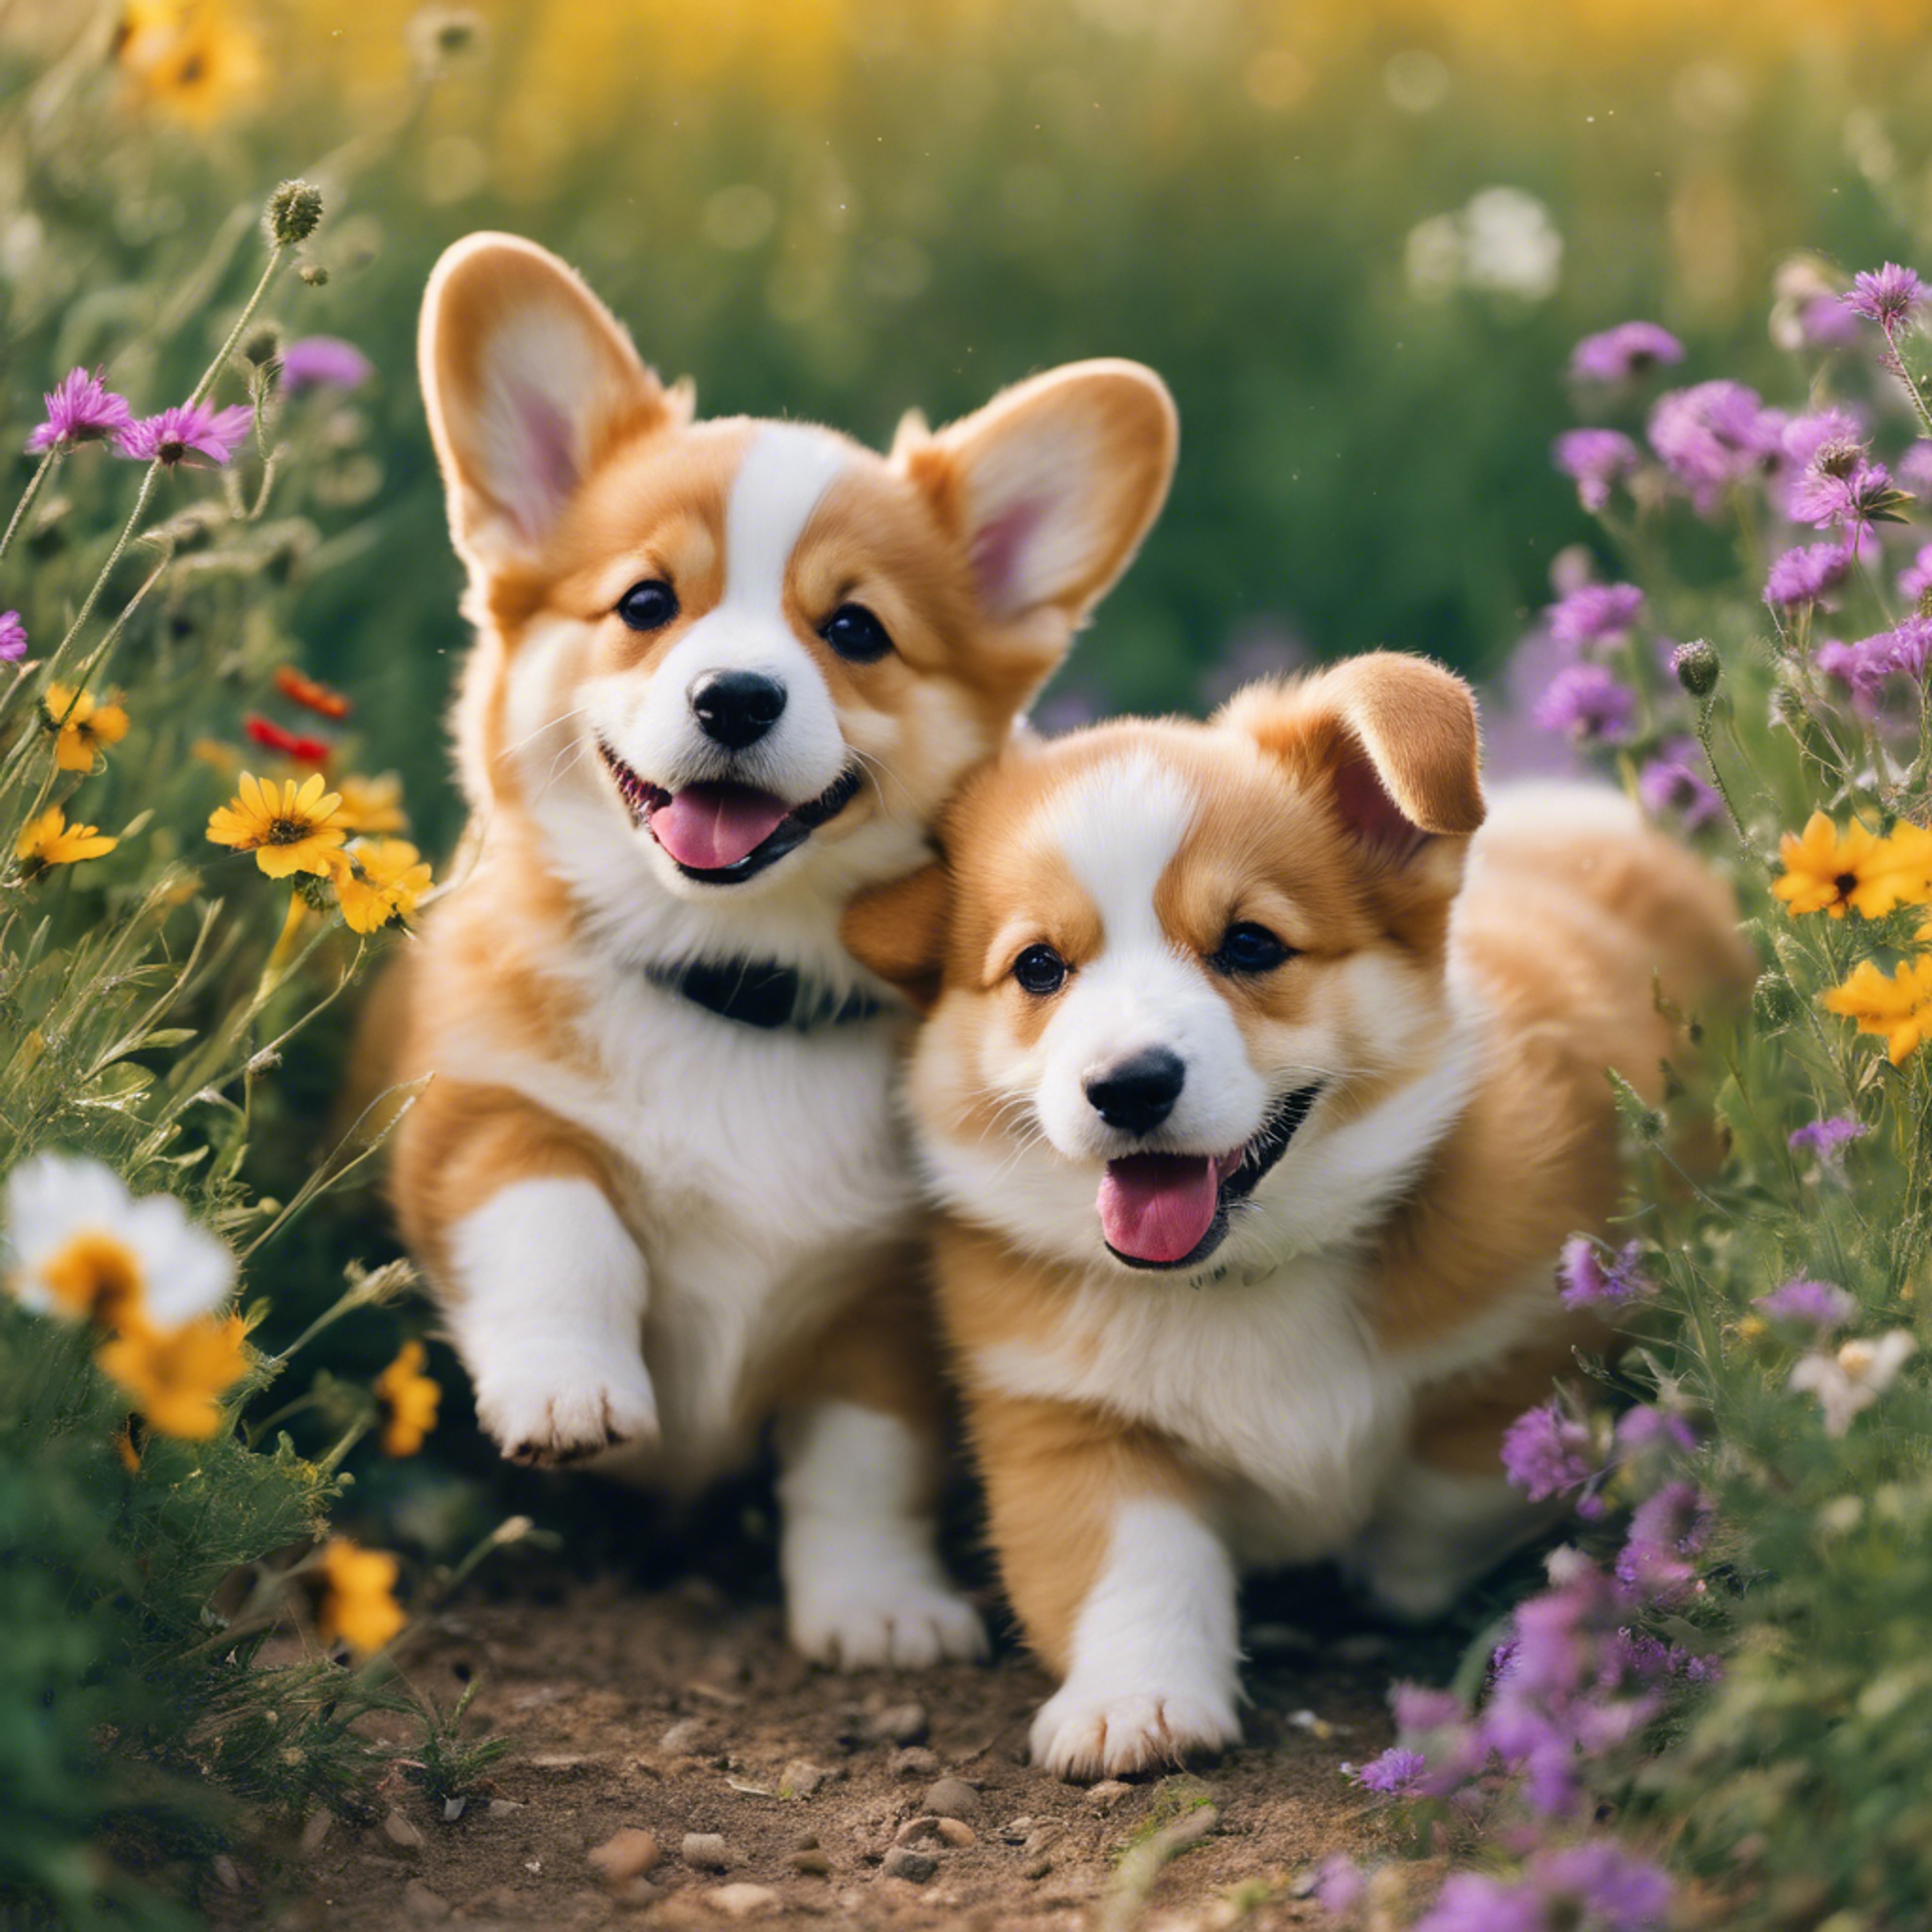 Corgi puppies frolic in a meadow filled with colourful wildflowers. کاغذ دیواری[ff39099a16654d489ef7]